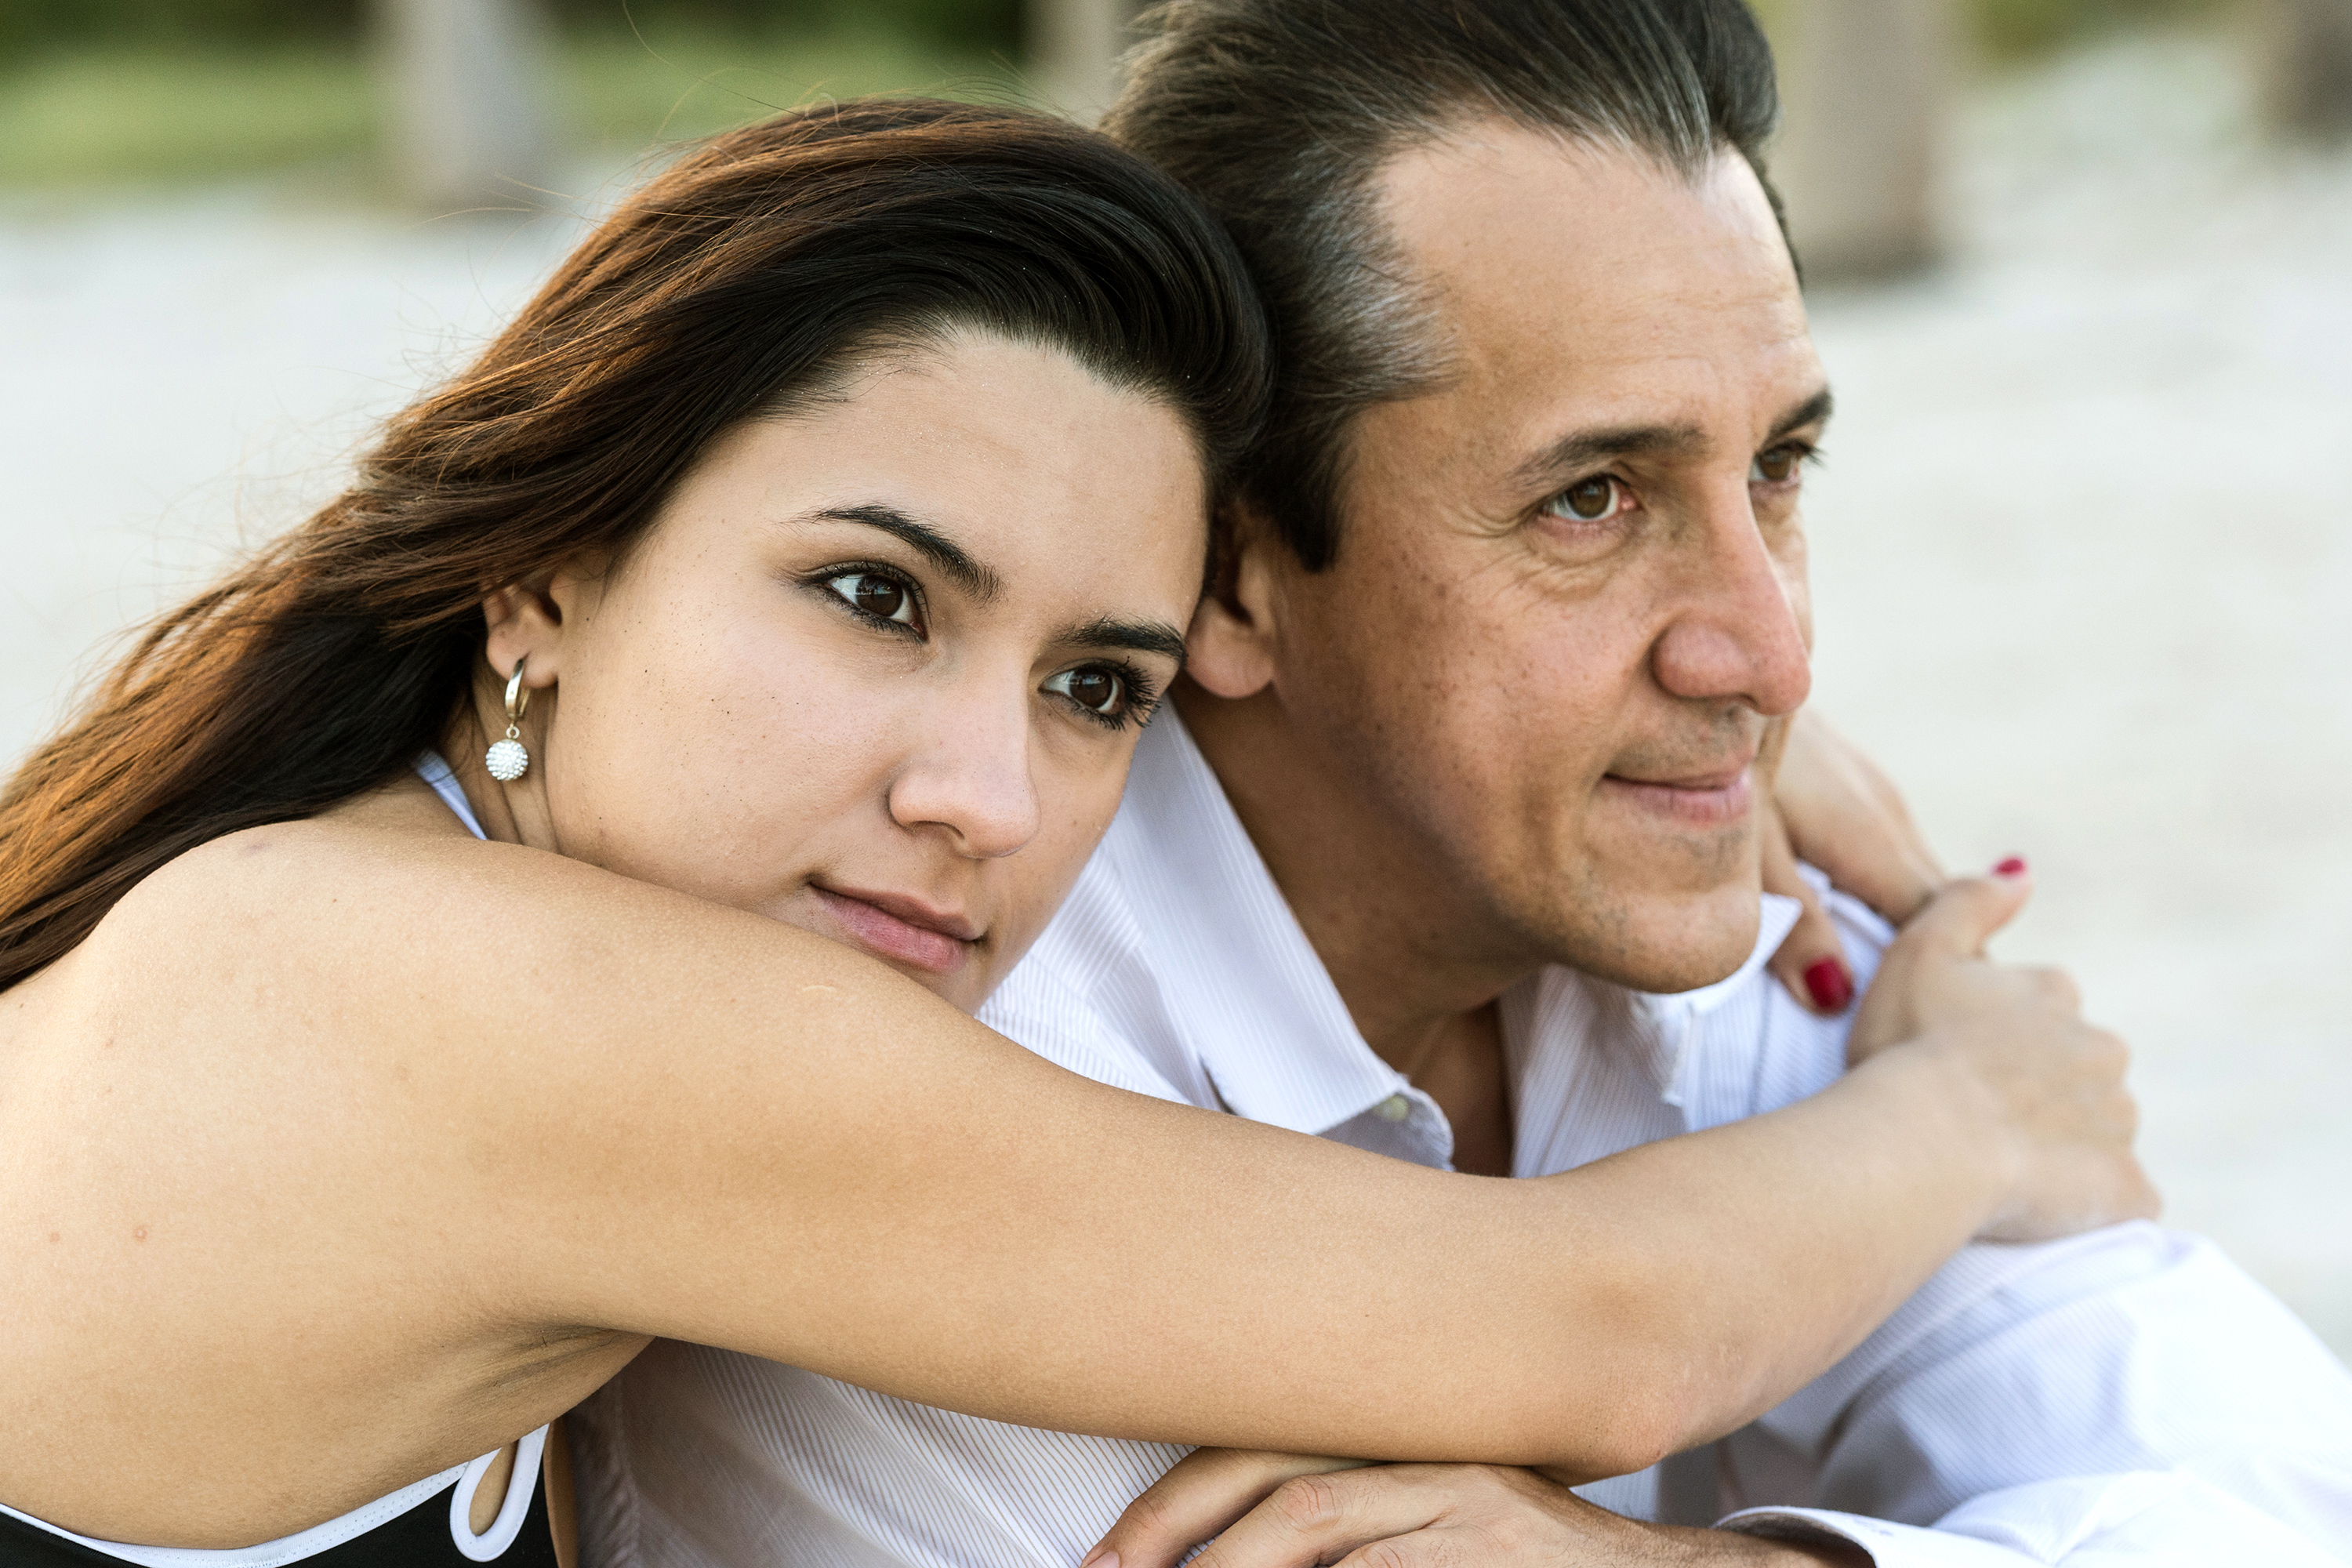 Daddy Issues Causes, Impact and How to Heal